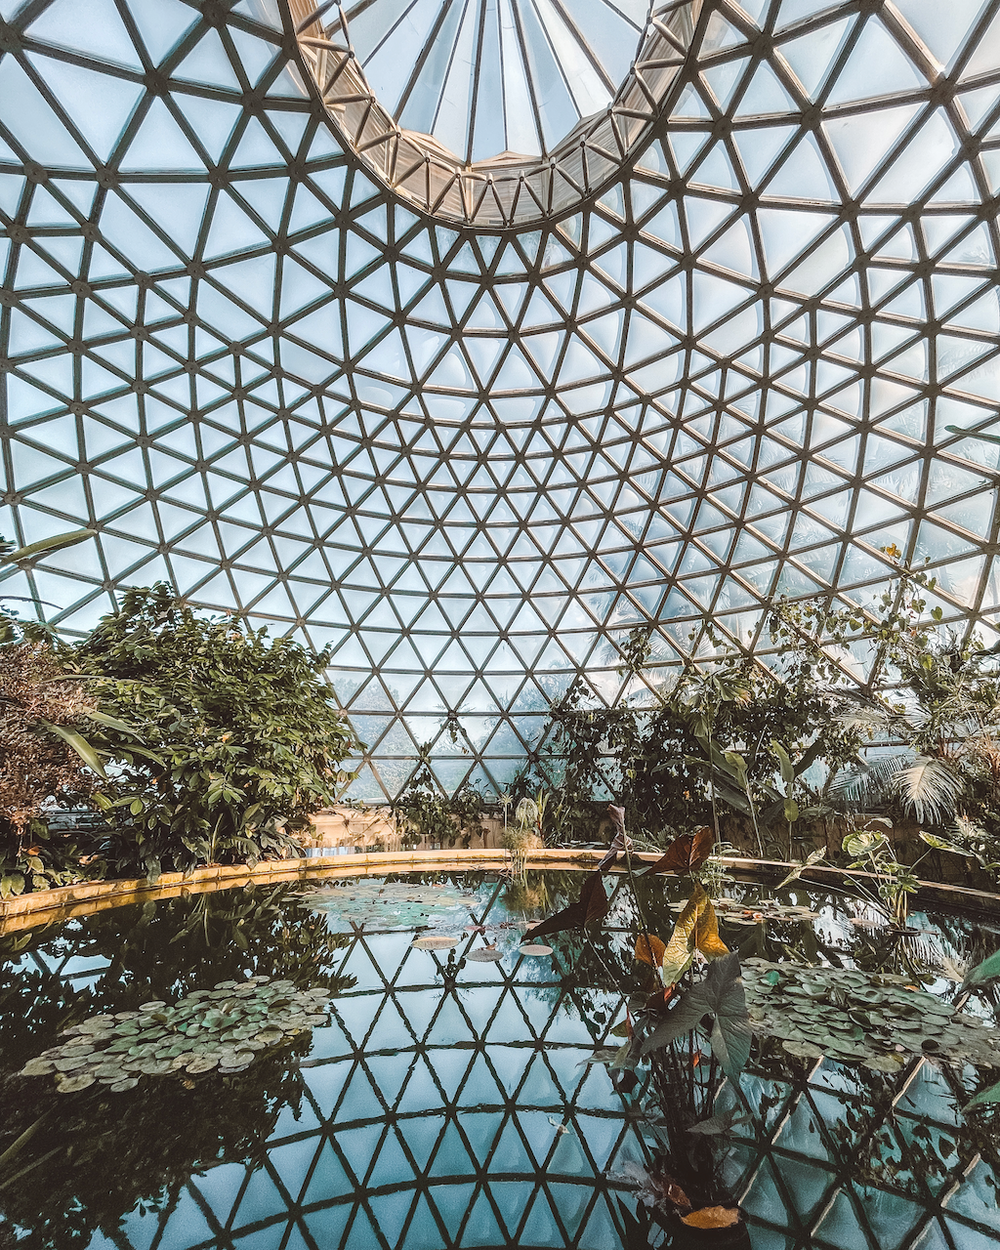 Inside the Tropical Dome on Mount Coot-Tha - Brisbane - Queensland - Australia